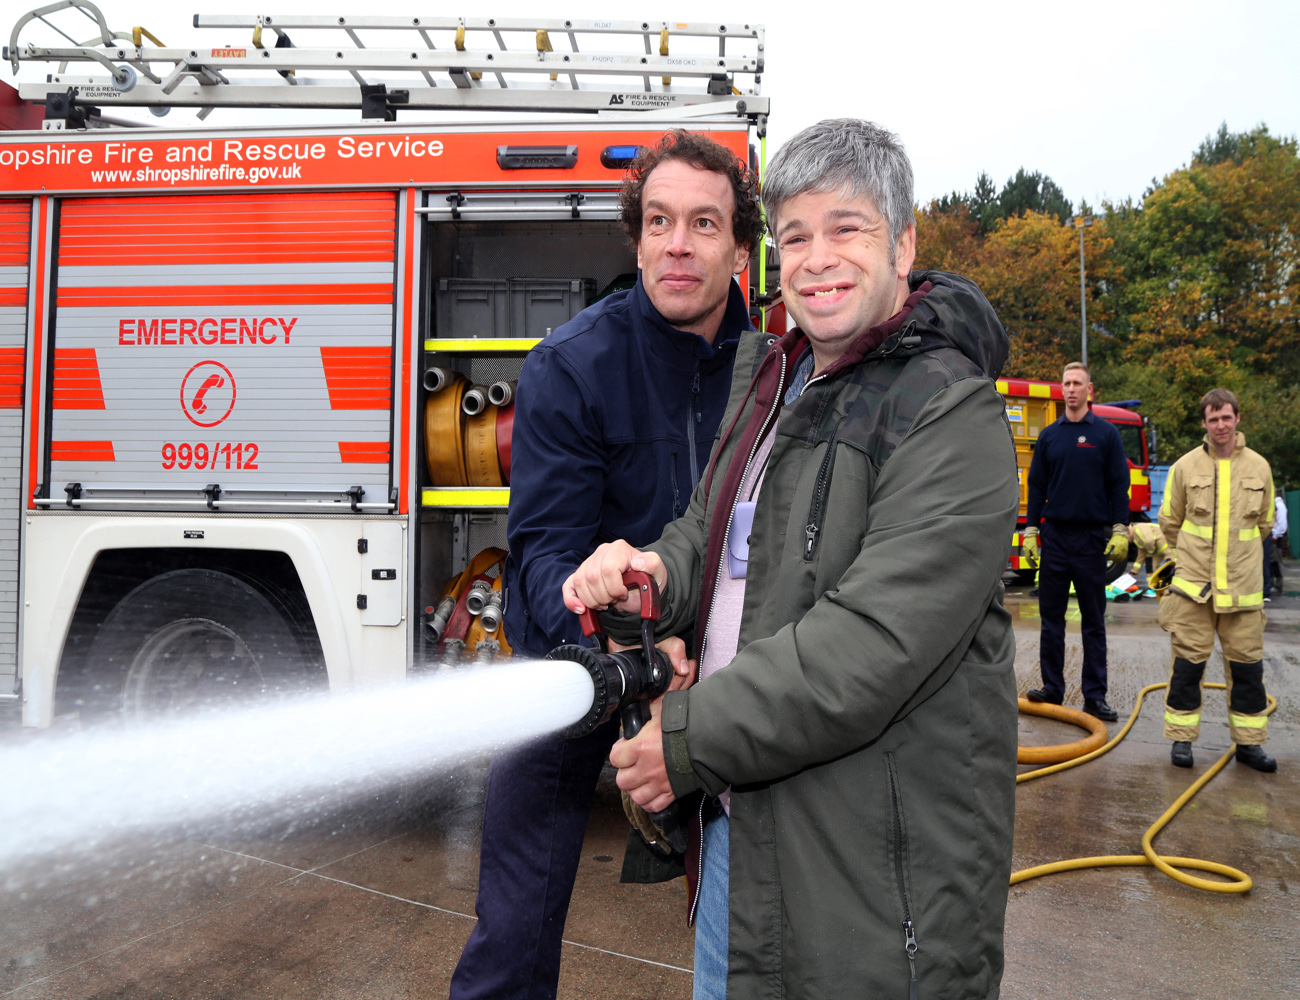 Firefighter Martin Poole shows Martin McCusker how to put out fires.